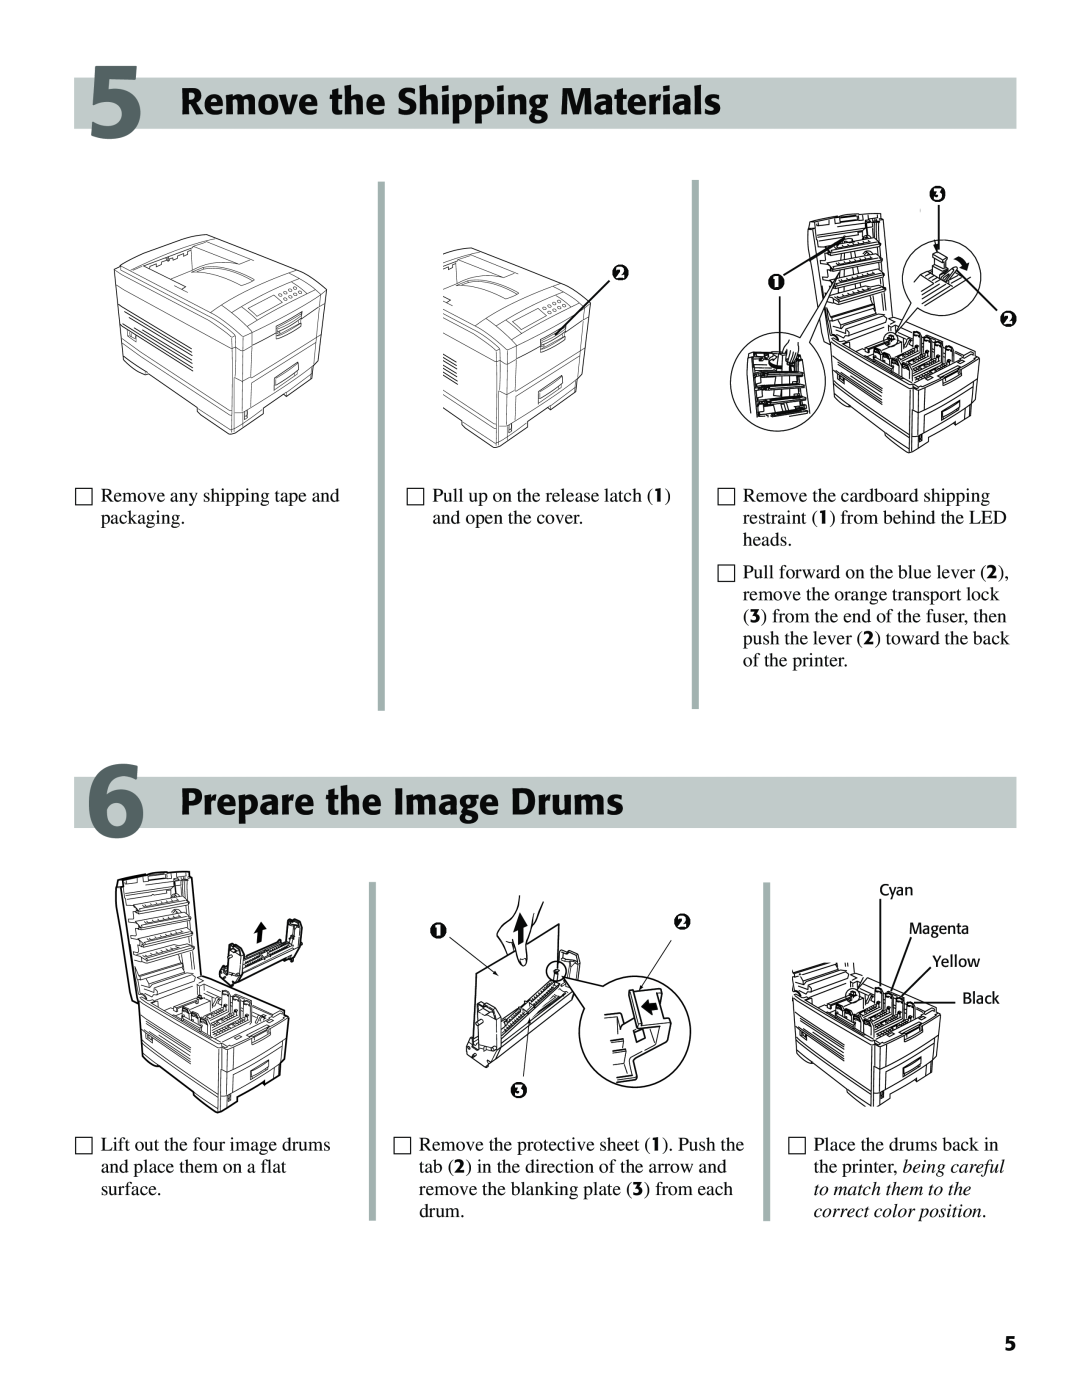 Oki C7000 setup guide Remove the Shipping Materials, Prepare the Image Drums 